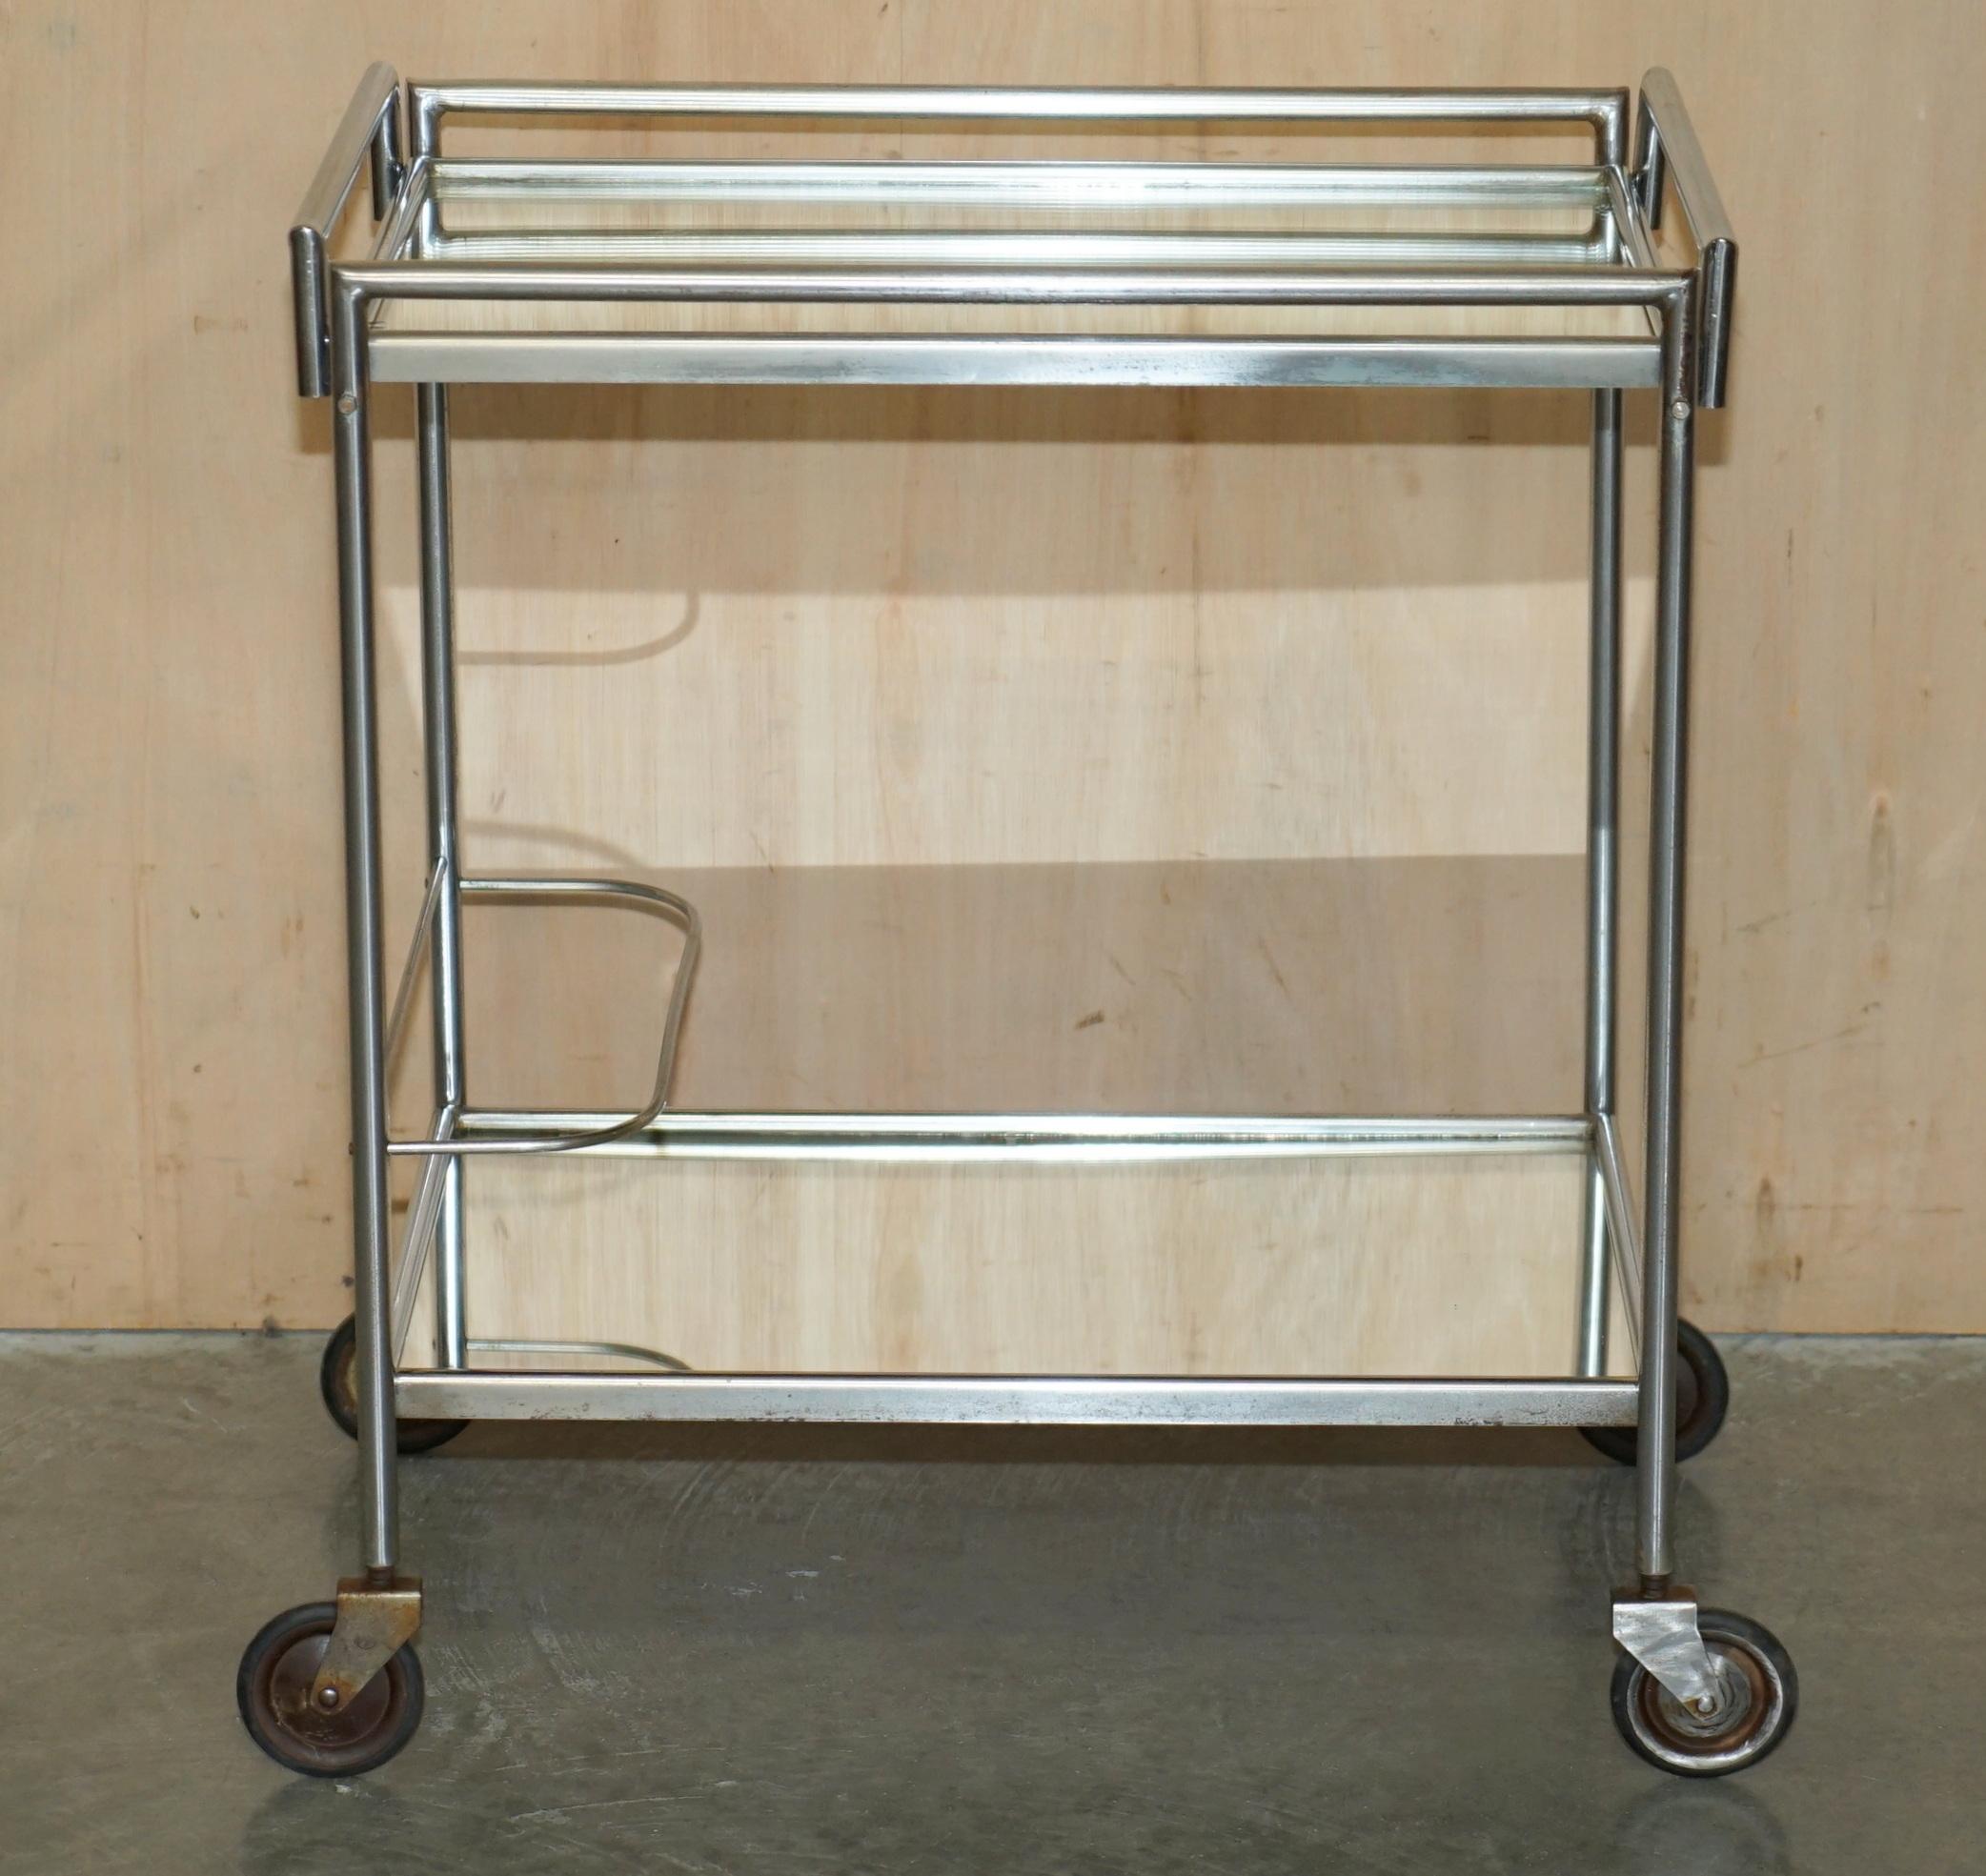 Royal House Antiques

Royal House Antiques is delighted to offer for sale this absolutely stunning circa 1920's Glass and Chrome Art Deco French drinks / snacks serving trolly 

Please note the delivery fee listed is just a guide, it covers within